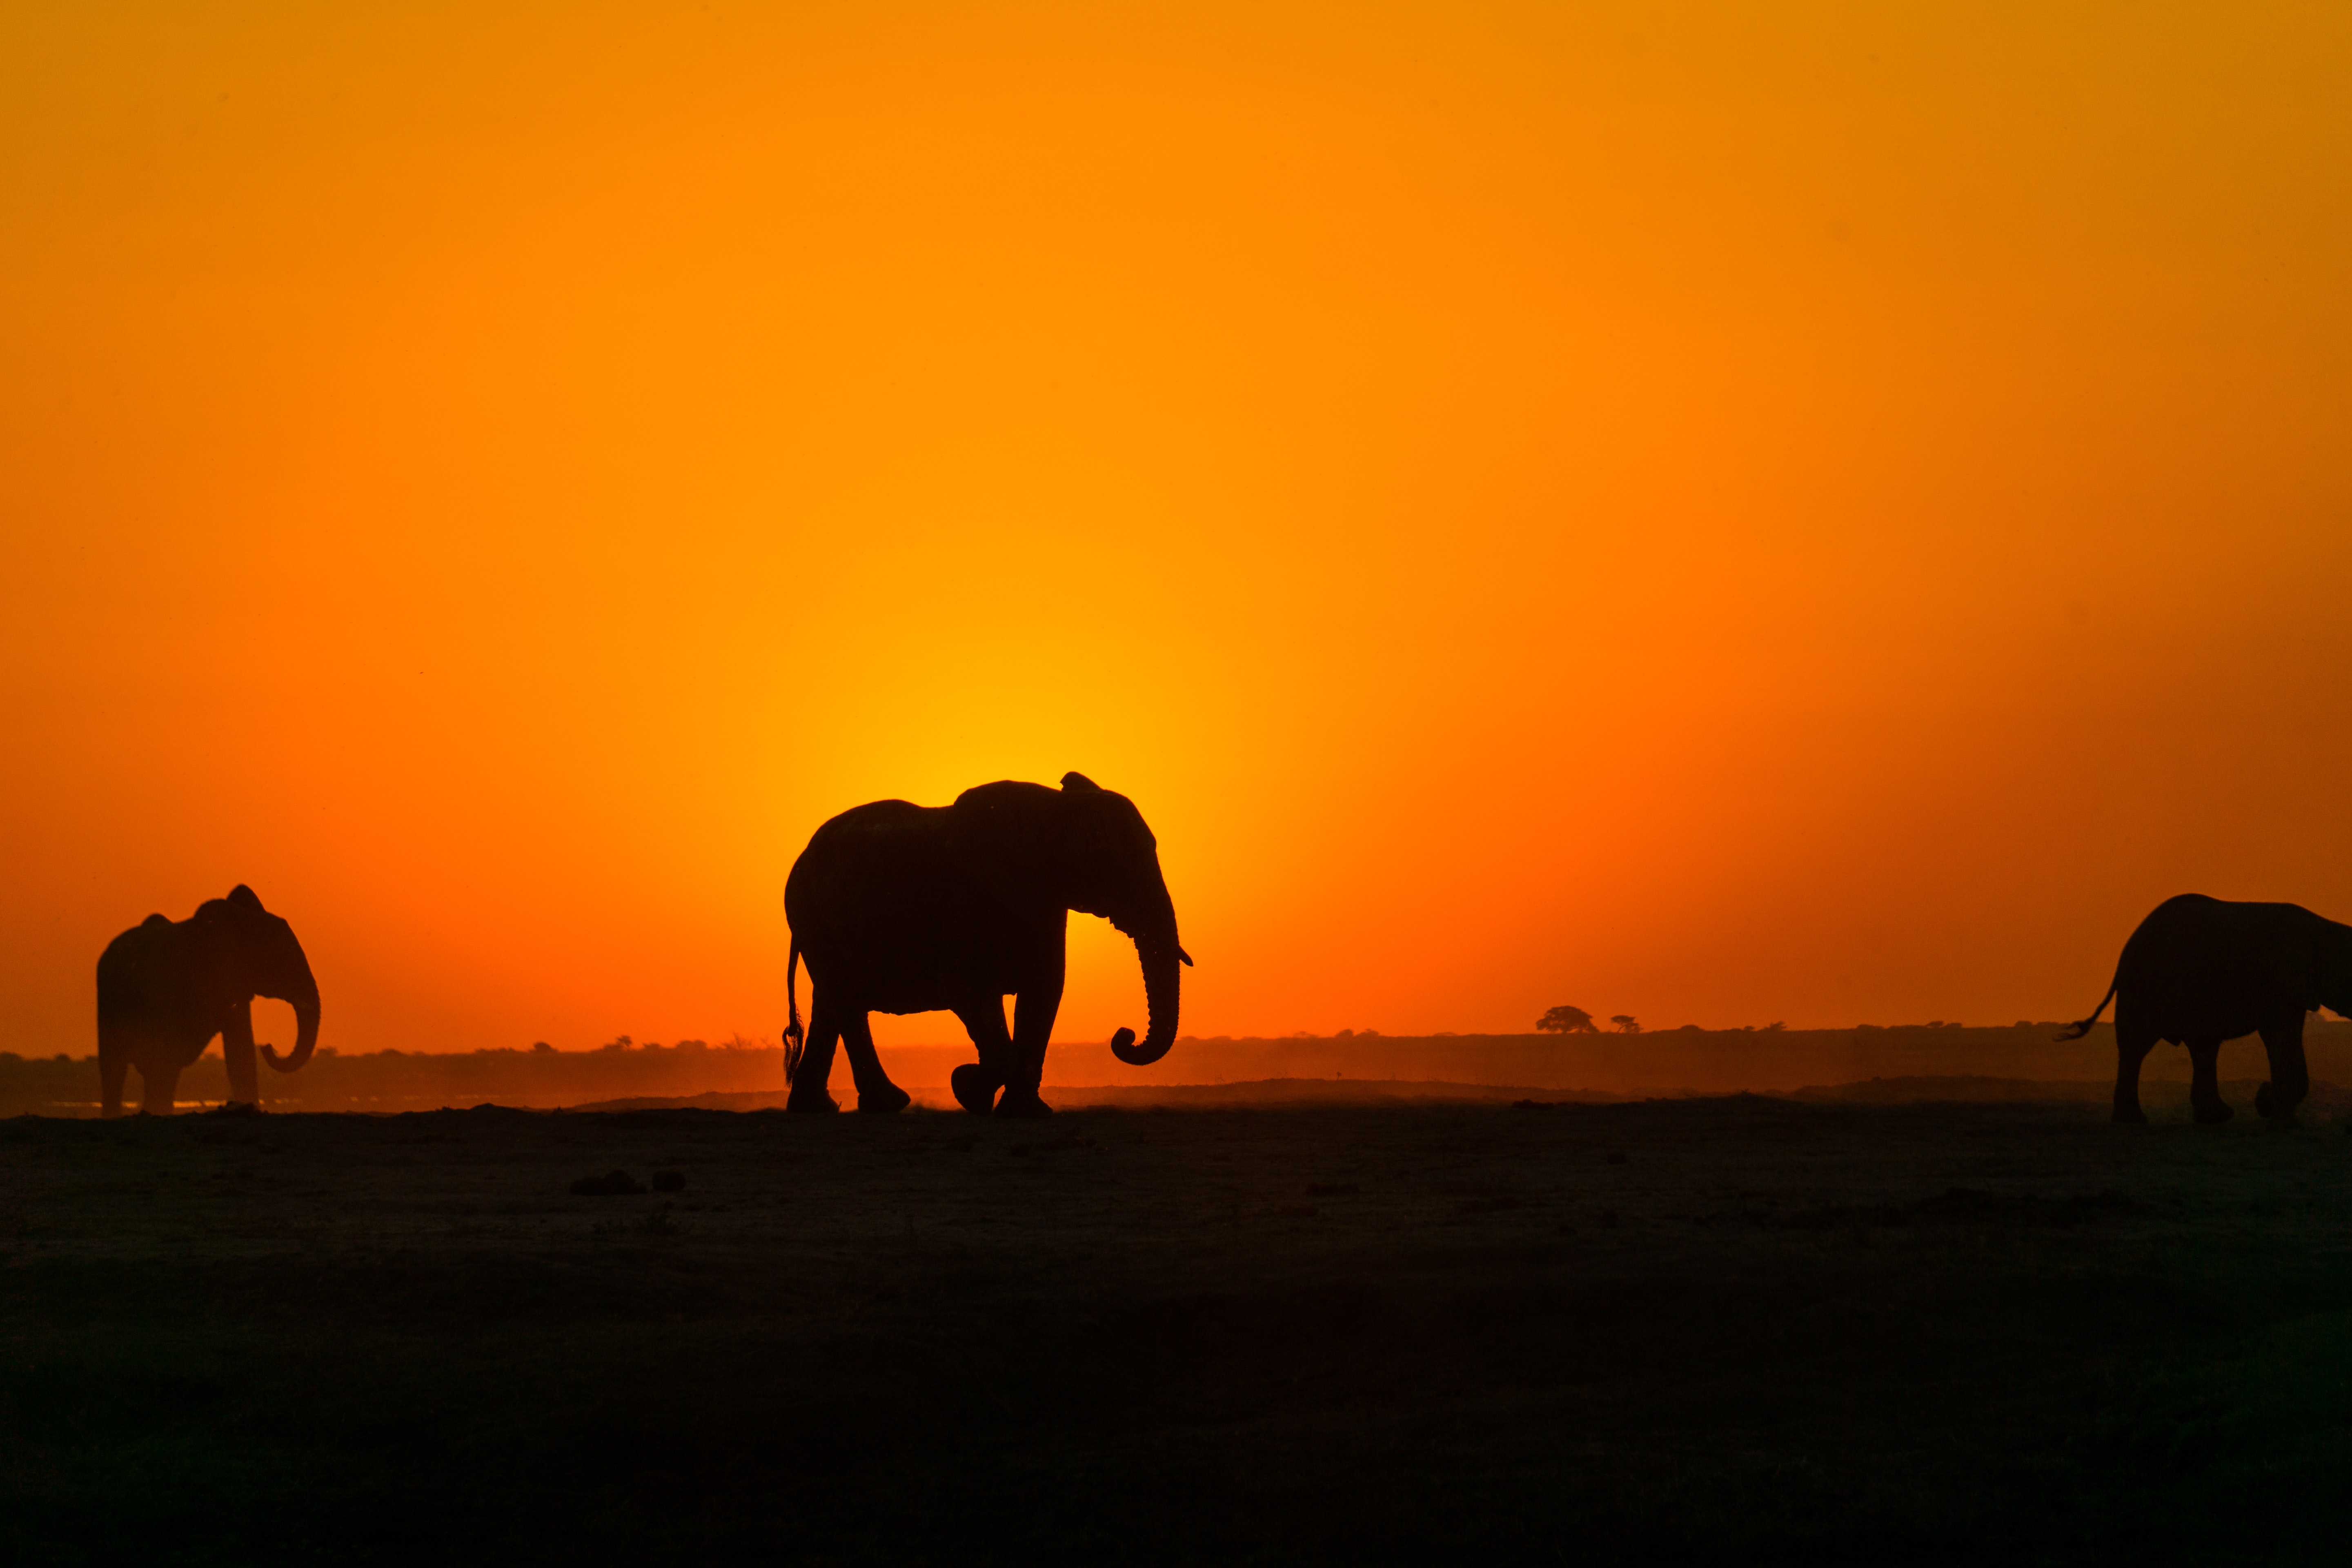 Three walking elephants in silhouette against the backdrop of a sunset.